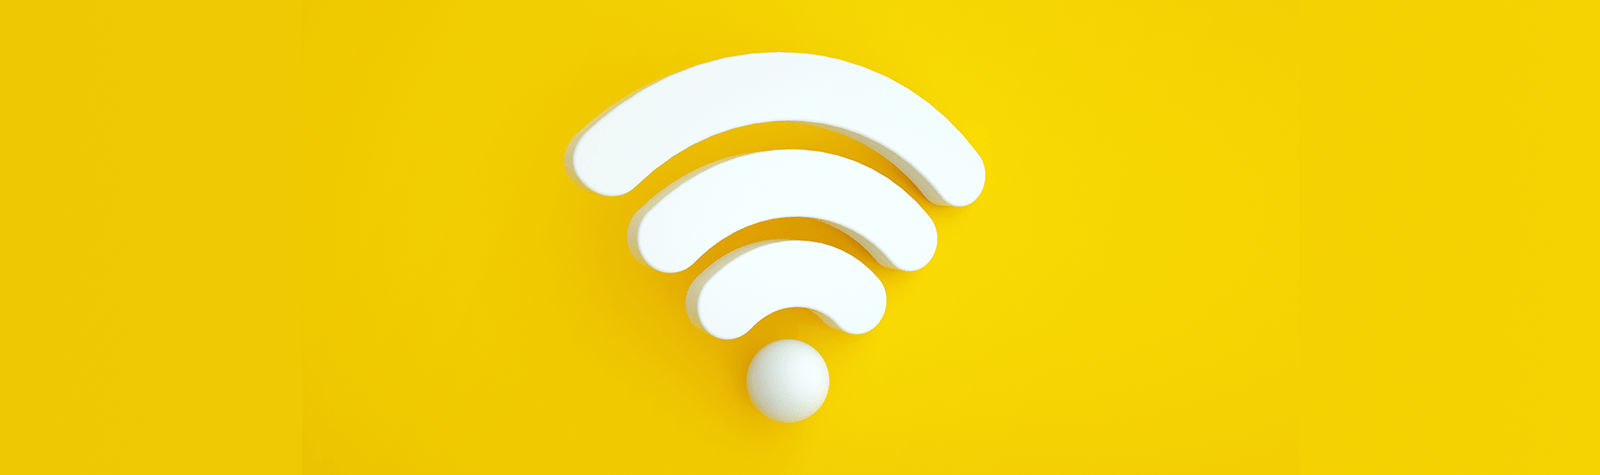 Wi-Fi 8: What Will the Next-Generation (Next-Gen) of Wi-Fi Be?